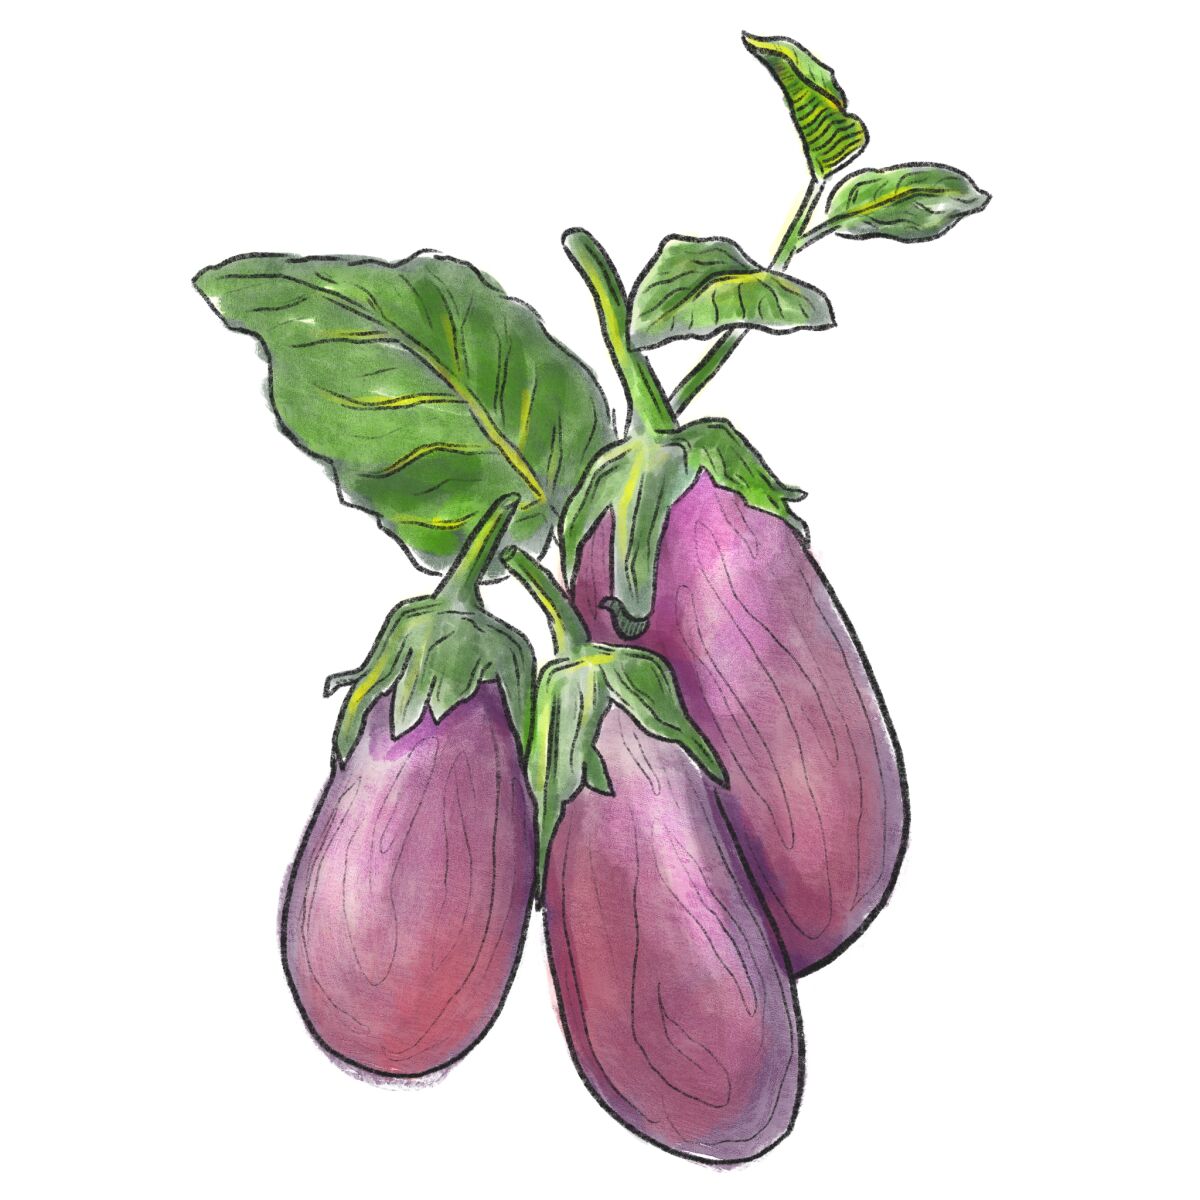 An illustration of eggplants with leaves